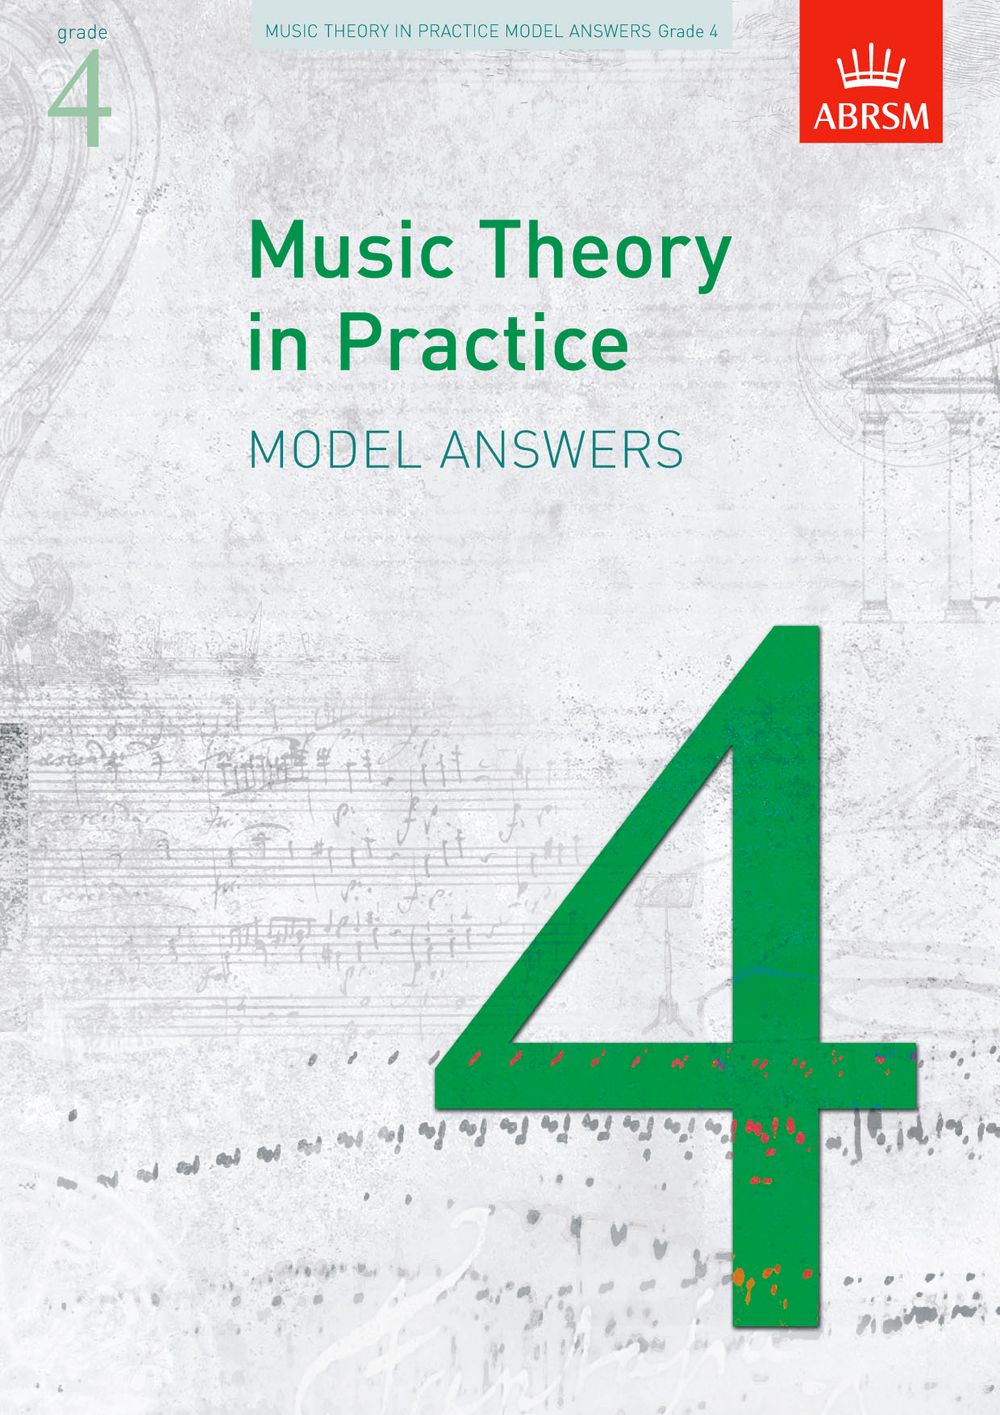 Music Theory in Practice Model Answers  Grade 4: Theory